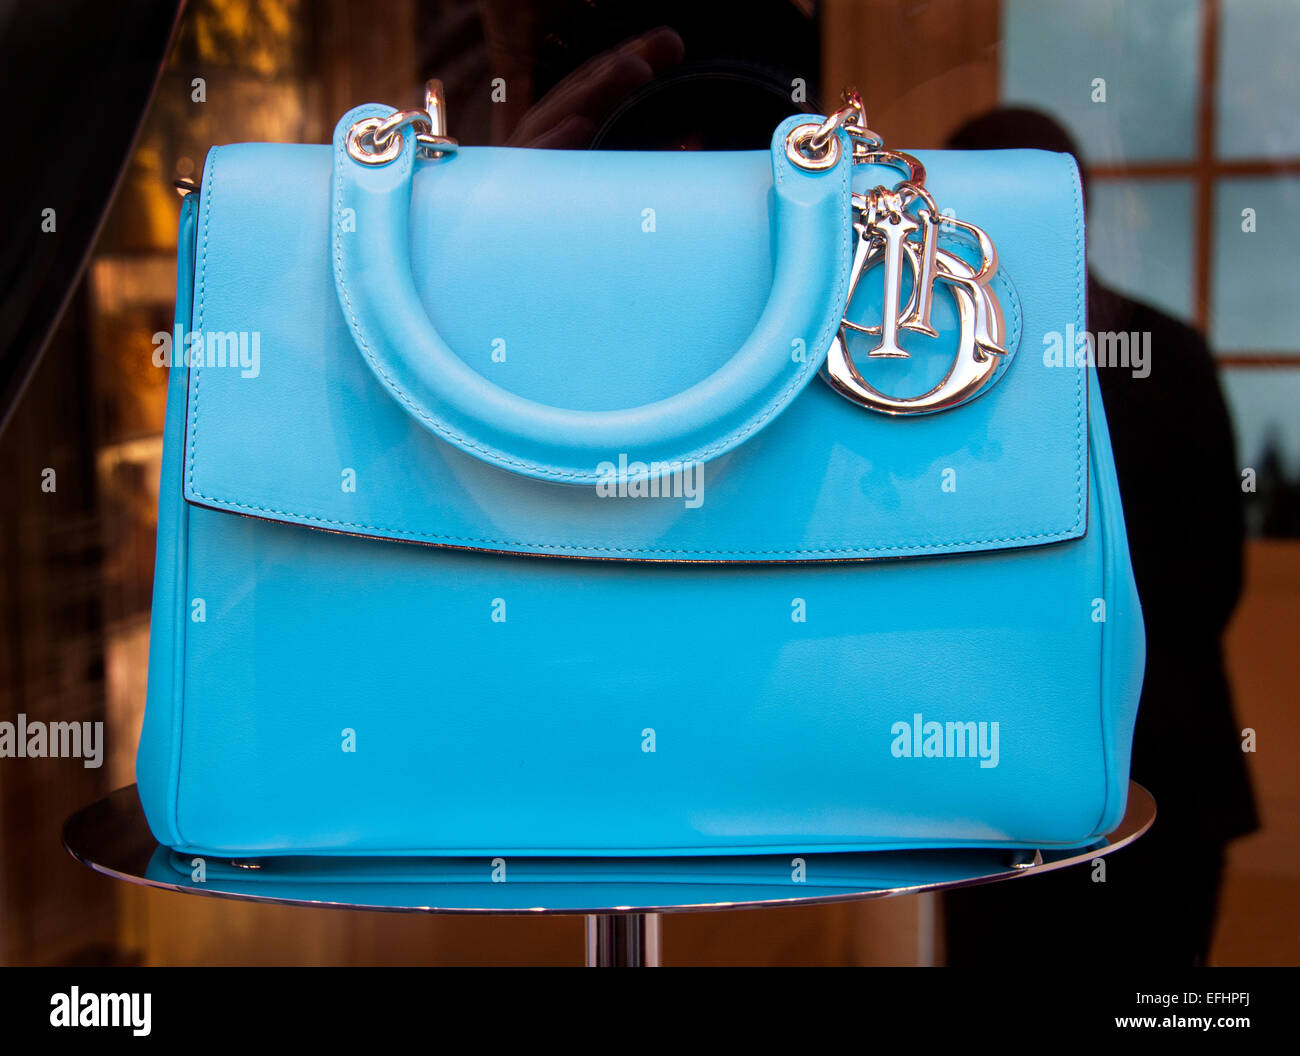 Lady Dior and Diorissimo Bags from Fall 2015 In Stores - Spotted Fashion